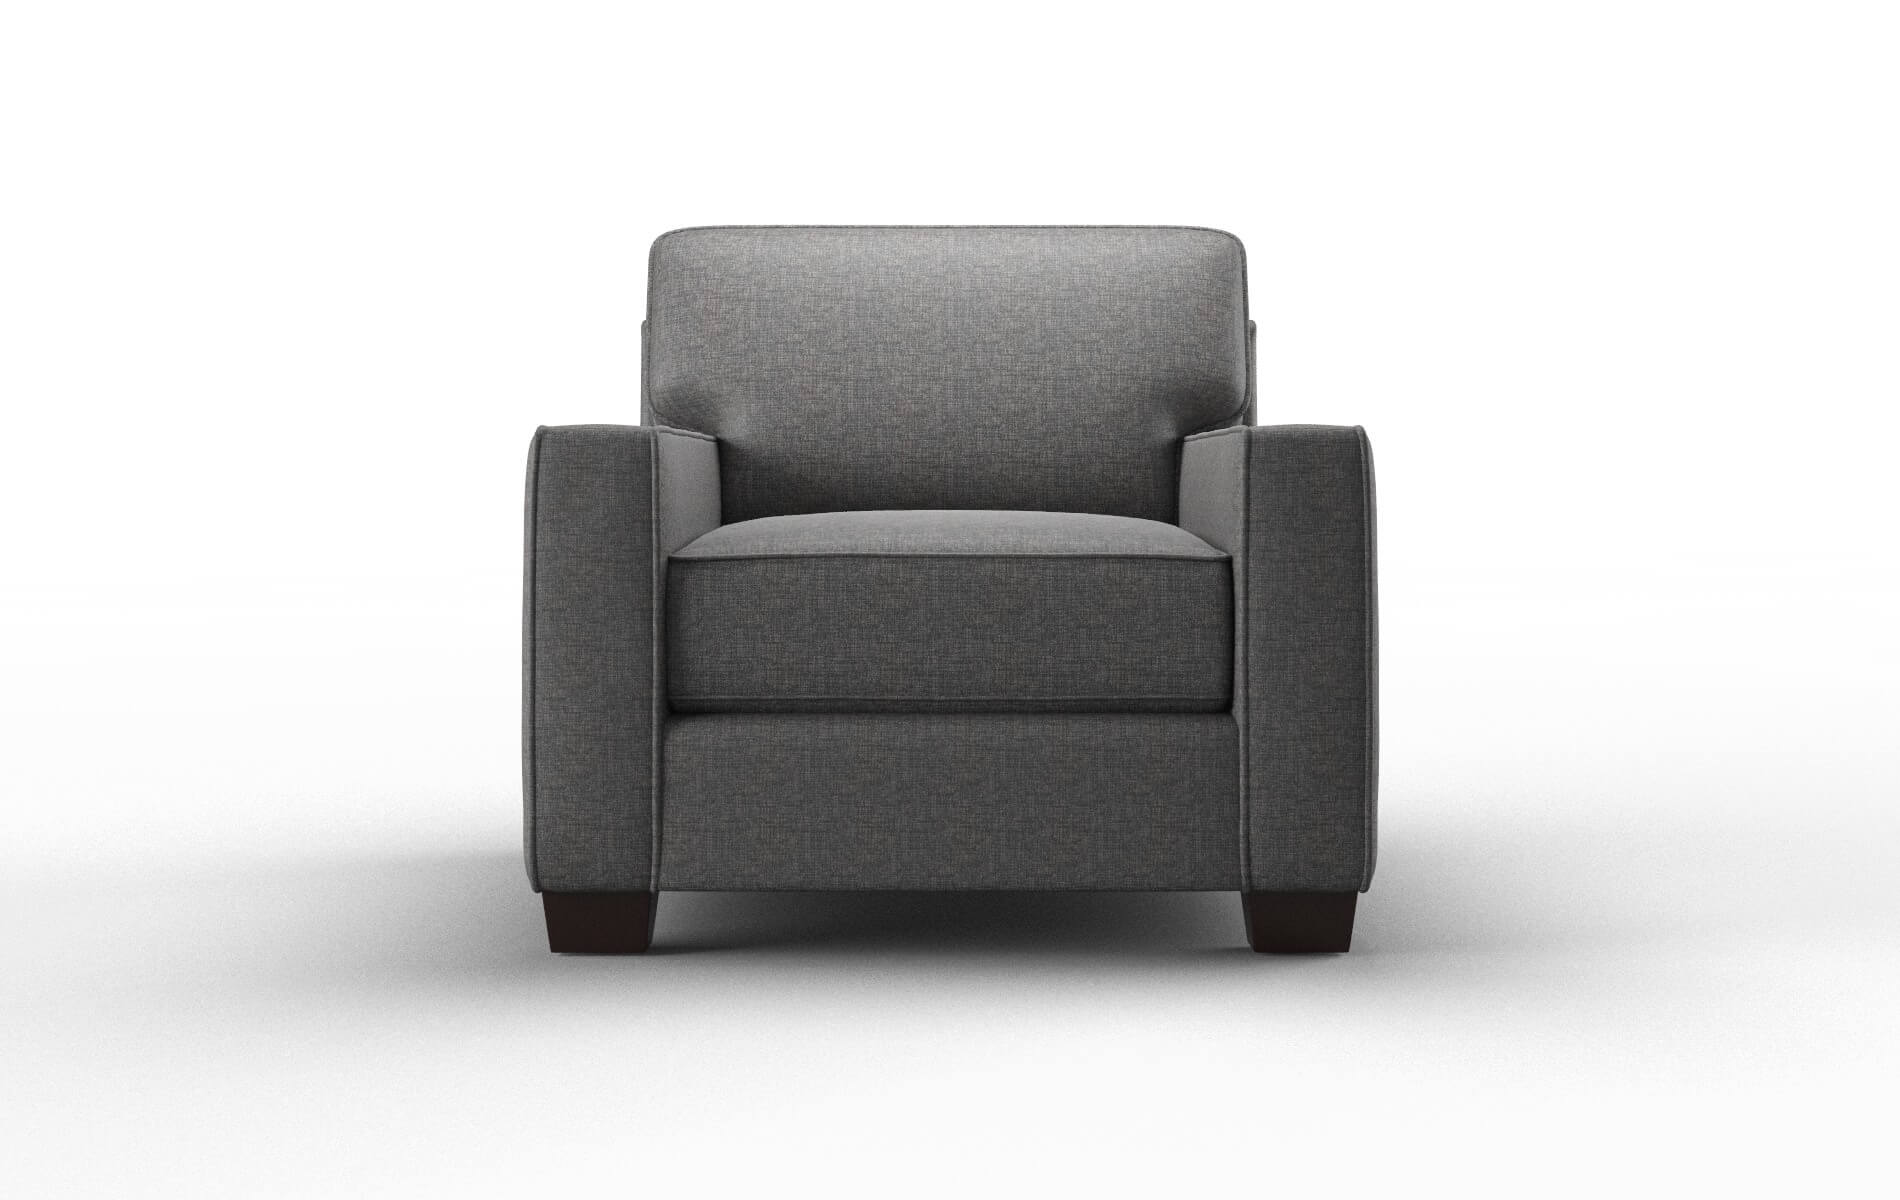 Chicago Insight Charcoal chair espresso legs